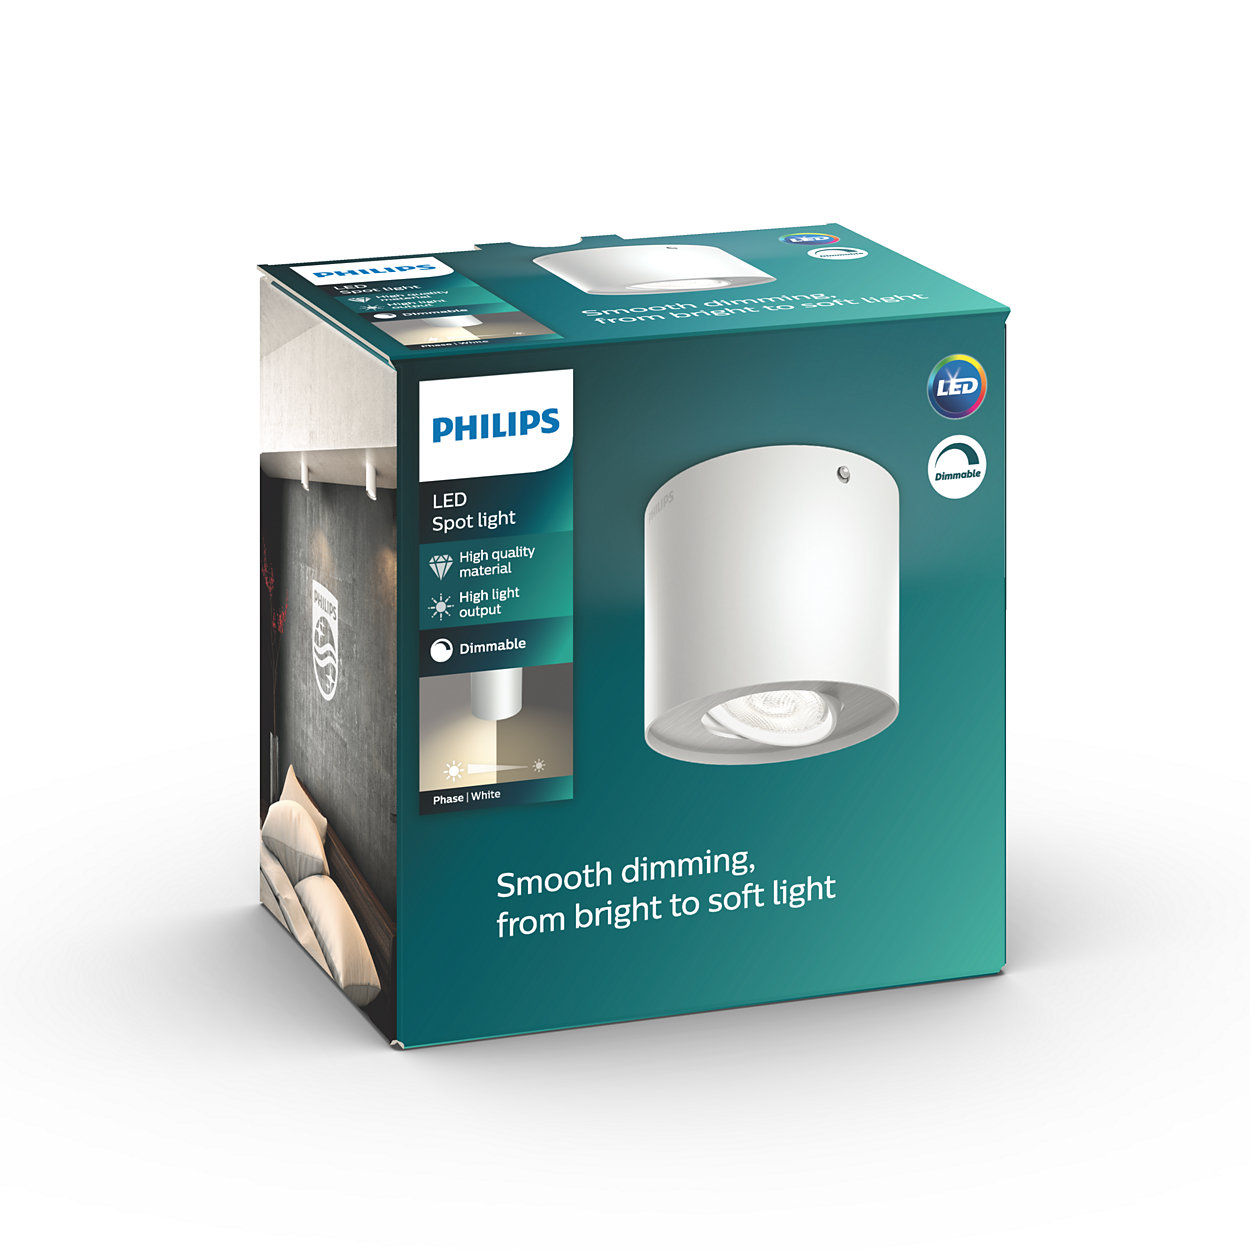 Dimmable LED single spot light | Philips